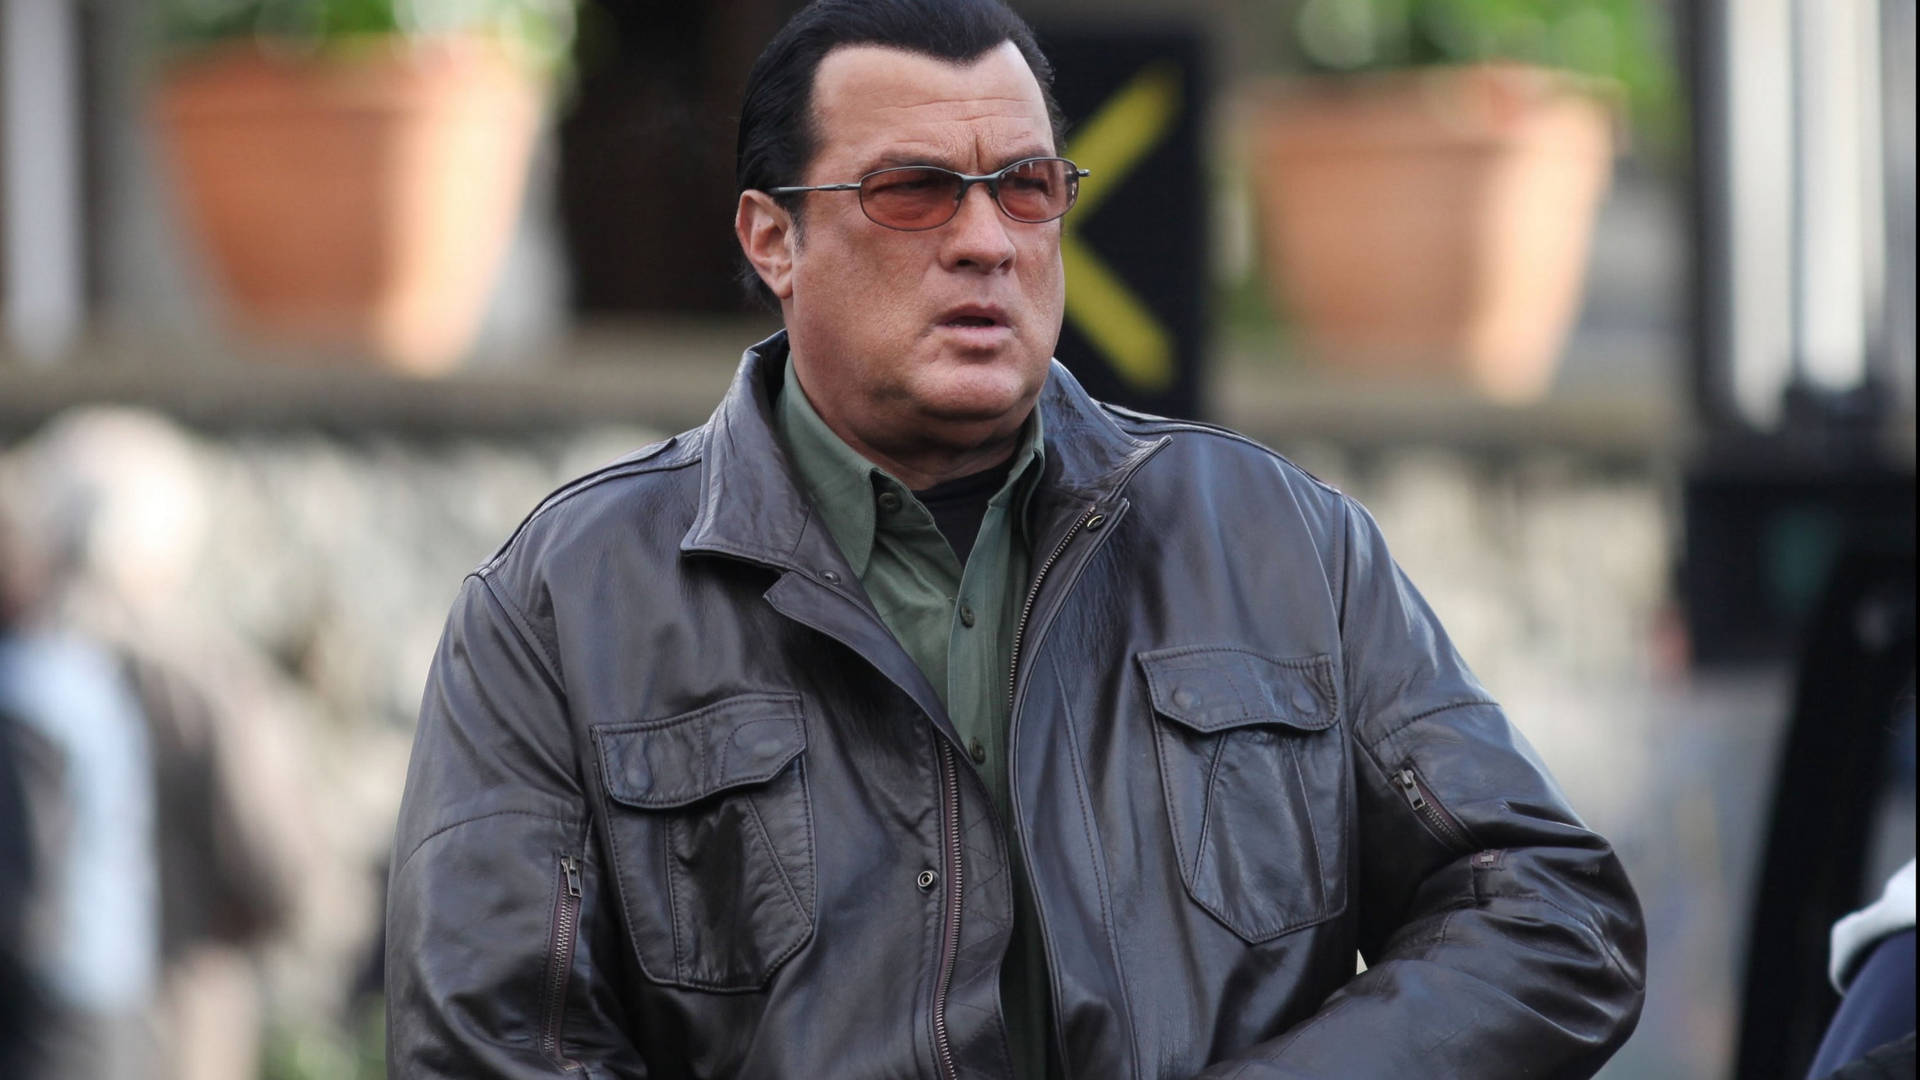 Steven Seagal: An Embodiment Of Action And Activism